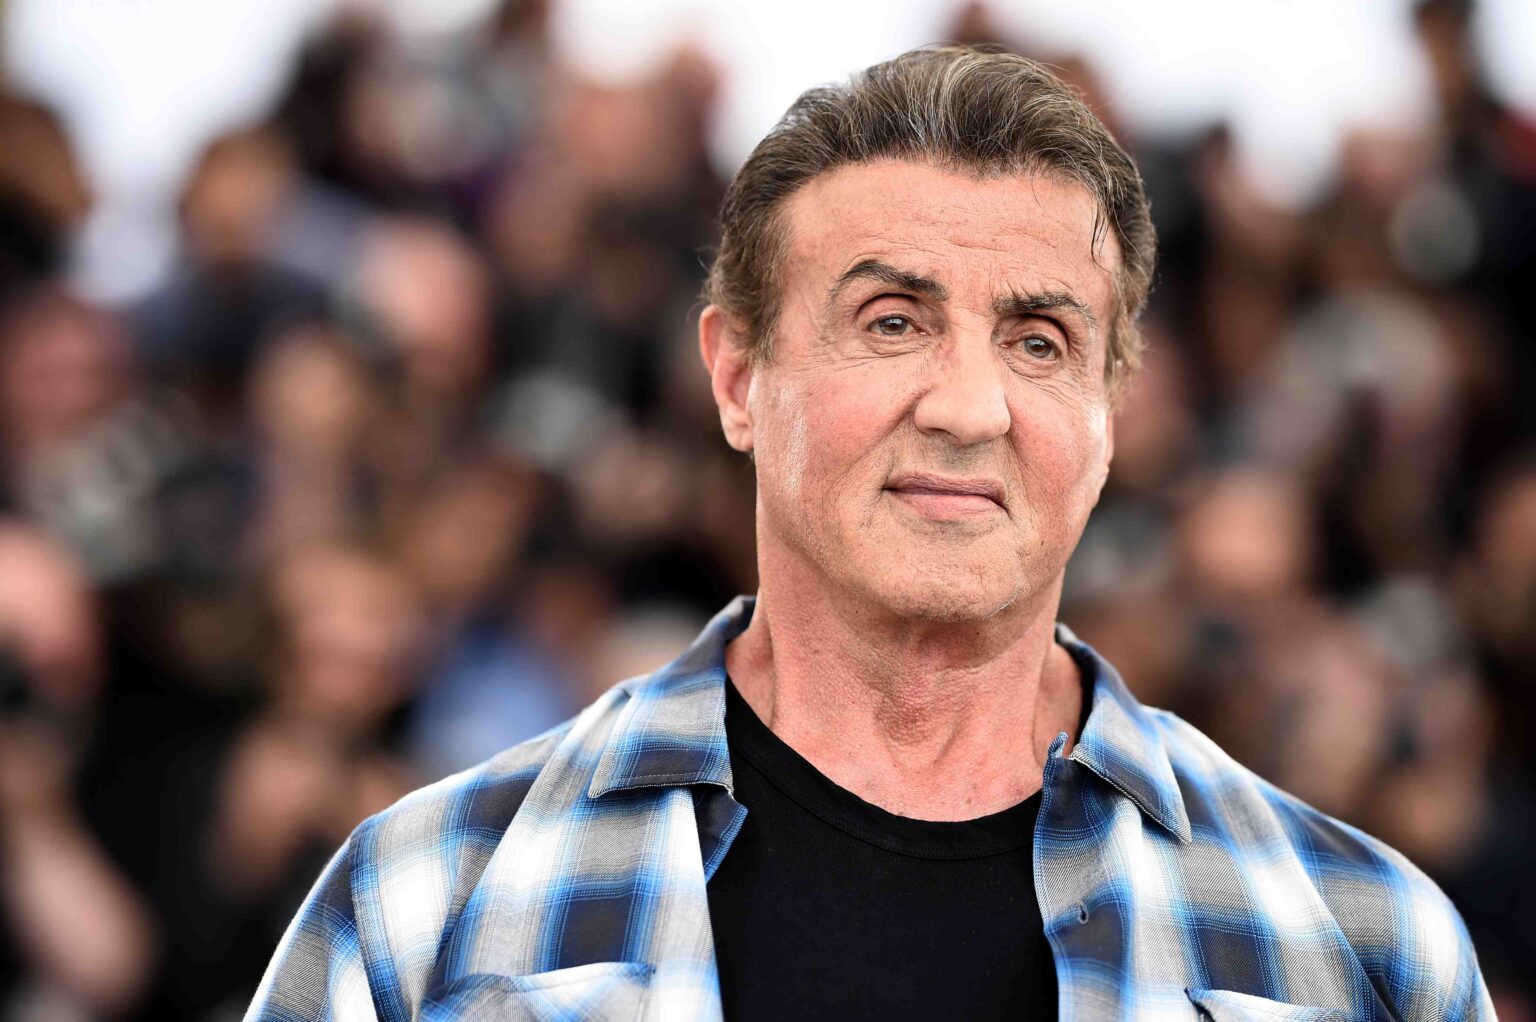 Dive into the Sylvester Stallone net worth controversy - Is the action hero's sequel streak punching zeroes off his fortunes or setting up for a financial knockout?